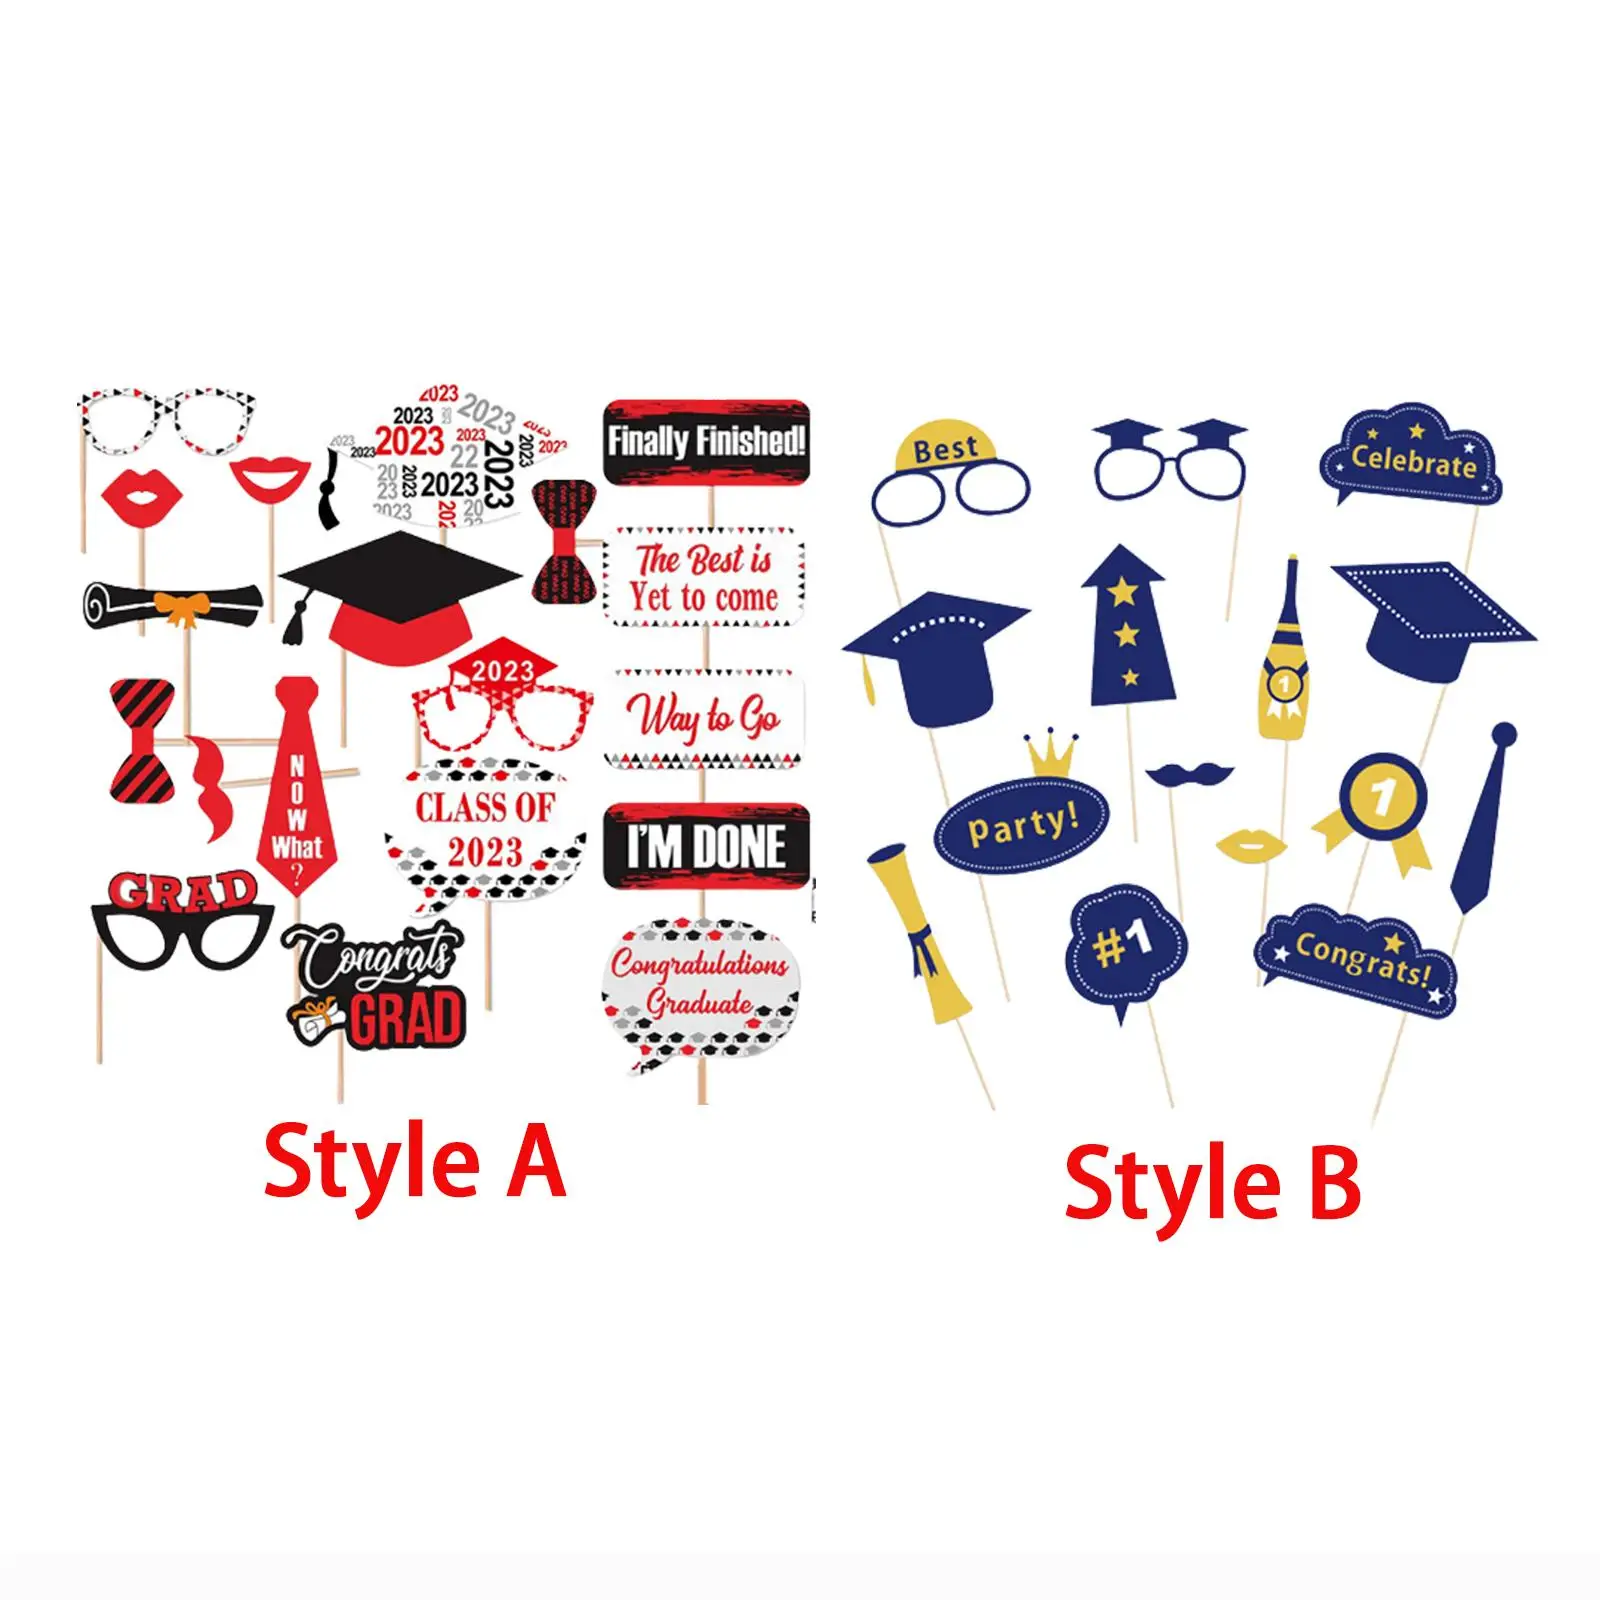 19x Graduation Photo Booth Props Graduation Party Selfie Funny Glitter Picture Cutout Props for Women Men Boys Girls College